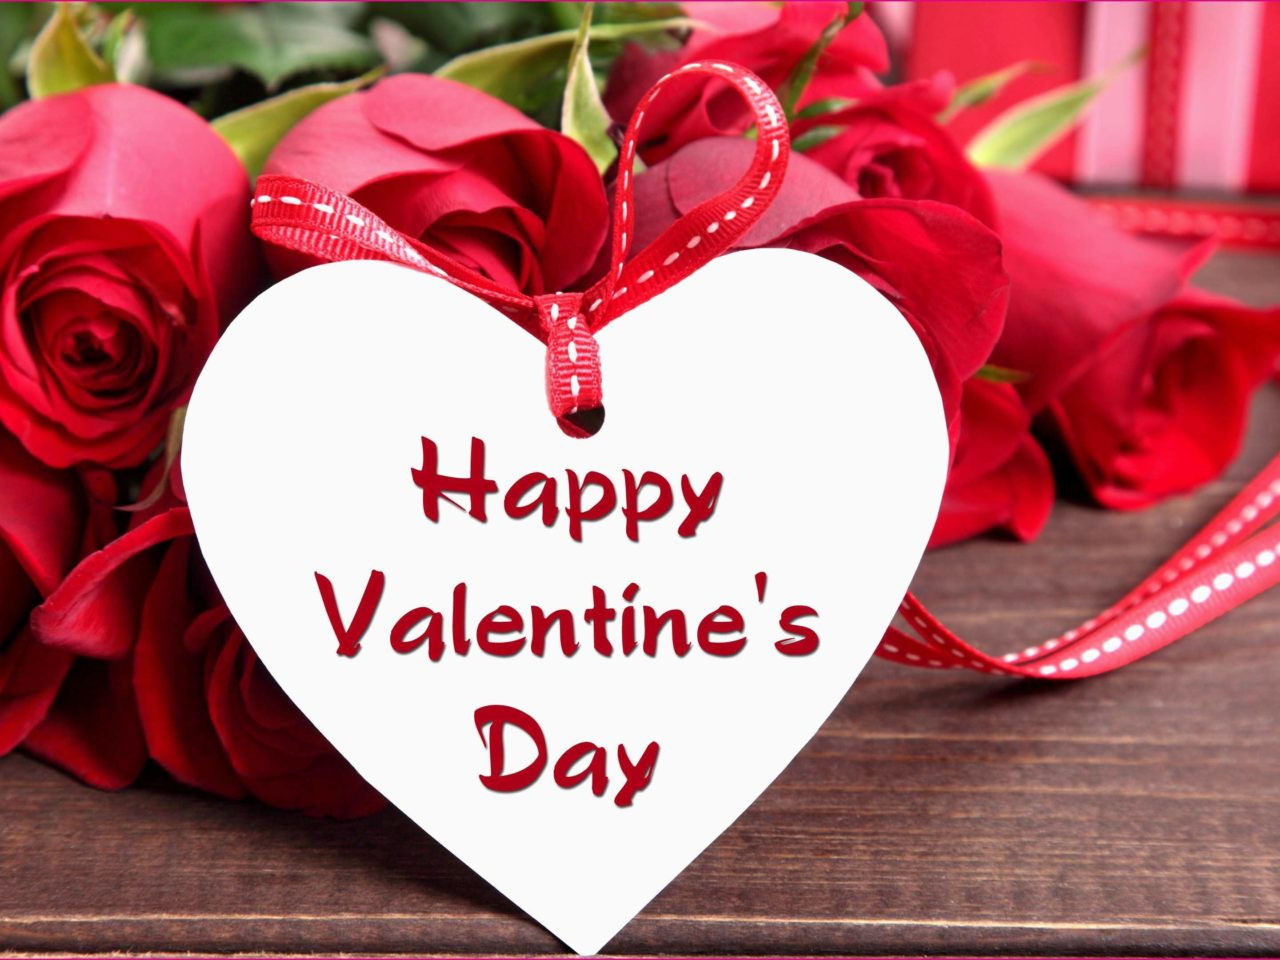 Valentines Day Pic and Quotes Lovely Happy Valentines Day Wishes Quotes Messages Love Hd